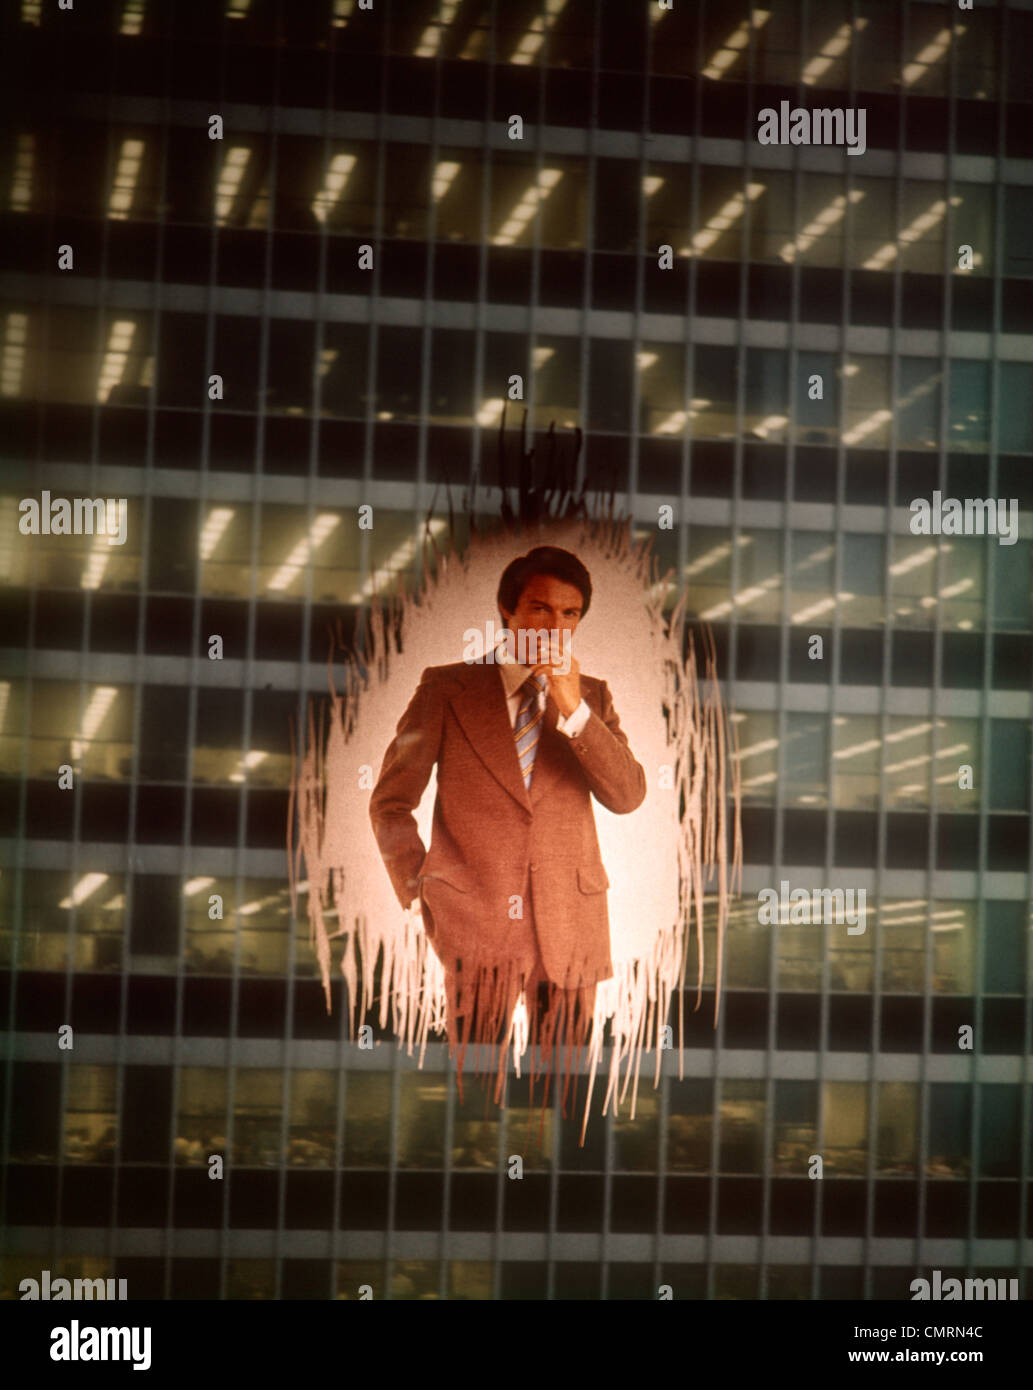 1970 1970s MAN BUSINESSMAN EXECUTIVE SMOKING CIGARETTE IMPOSED EXTERIOR SHOT OFFICE BULDING WINDOW MYSTERY STORY Stock Photo